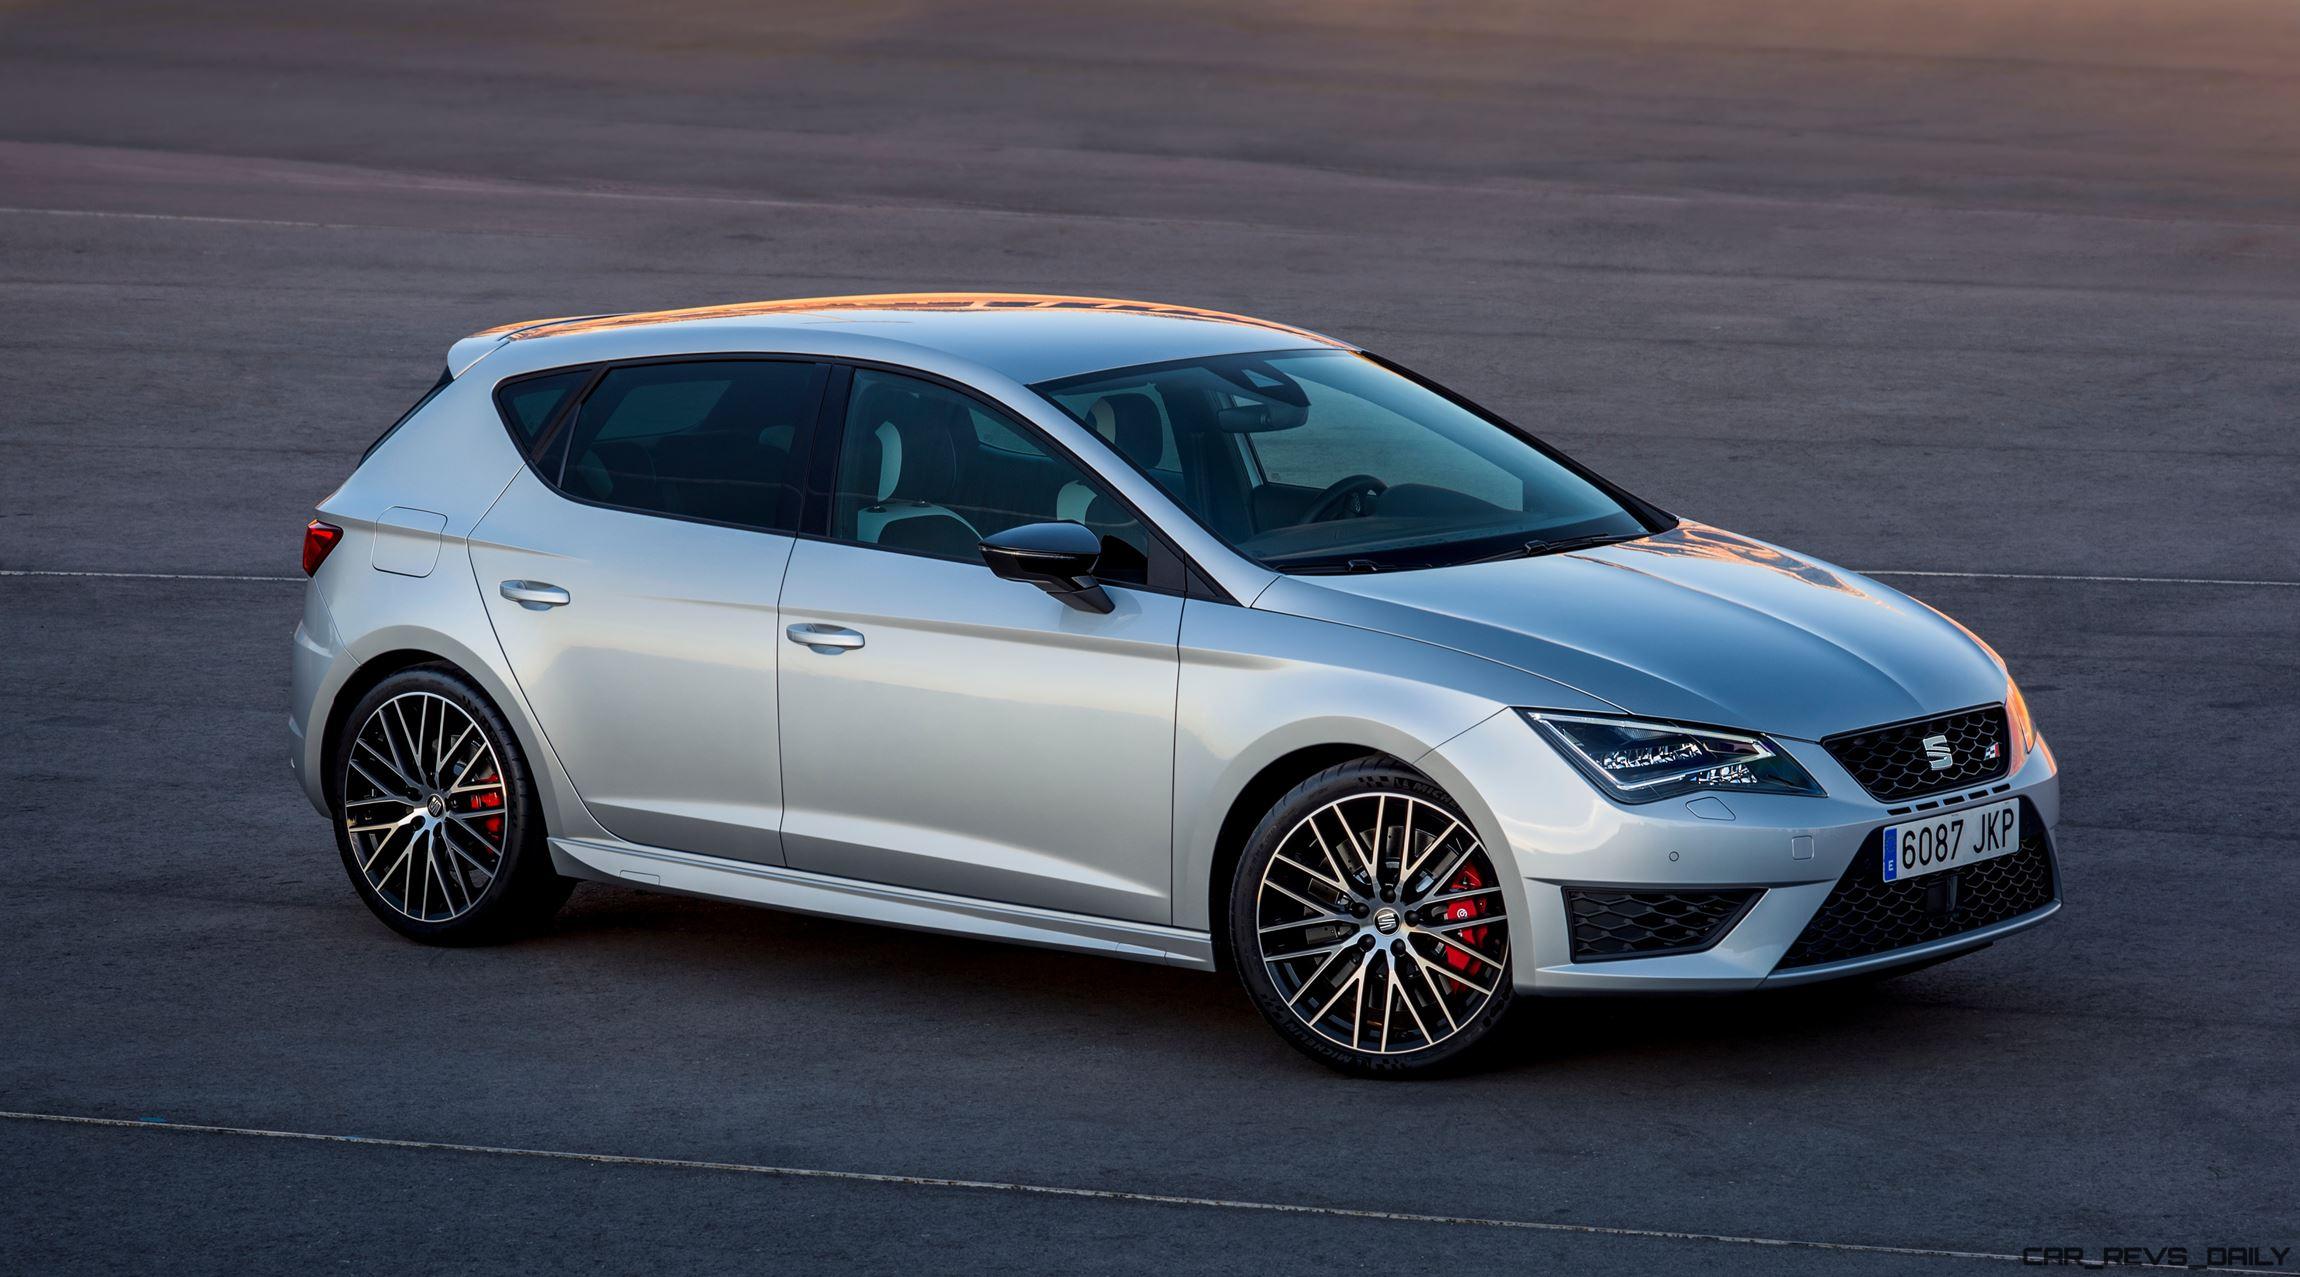 2016 SEAT Leon CUPRA 290 - GTI-Beating Coupe, Hatch and Wagon Gain New